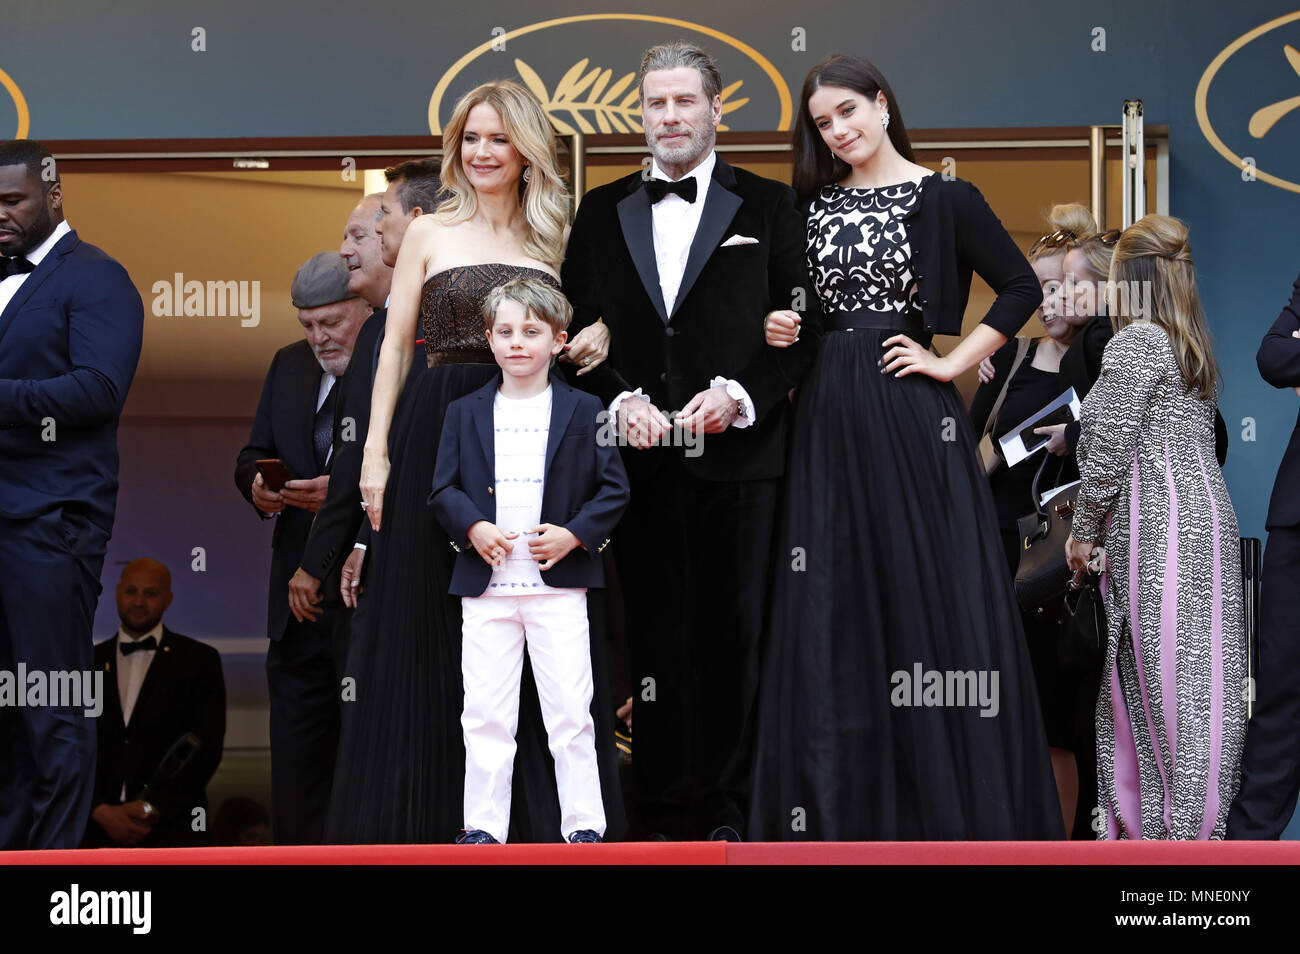 John Travolta, his wife Kelly Preston and their children Ella Bleu Travolta and Benjamin Travolta attending the 'Solo: A Star Wars Story' premiere during the 71st Cannes Film Festival at the Palais des Festivals on May 15, 2018 in Cannes, France | Verwendung weltweit Stock Photo